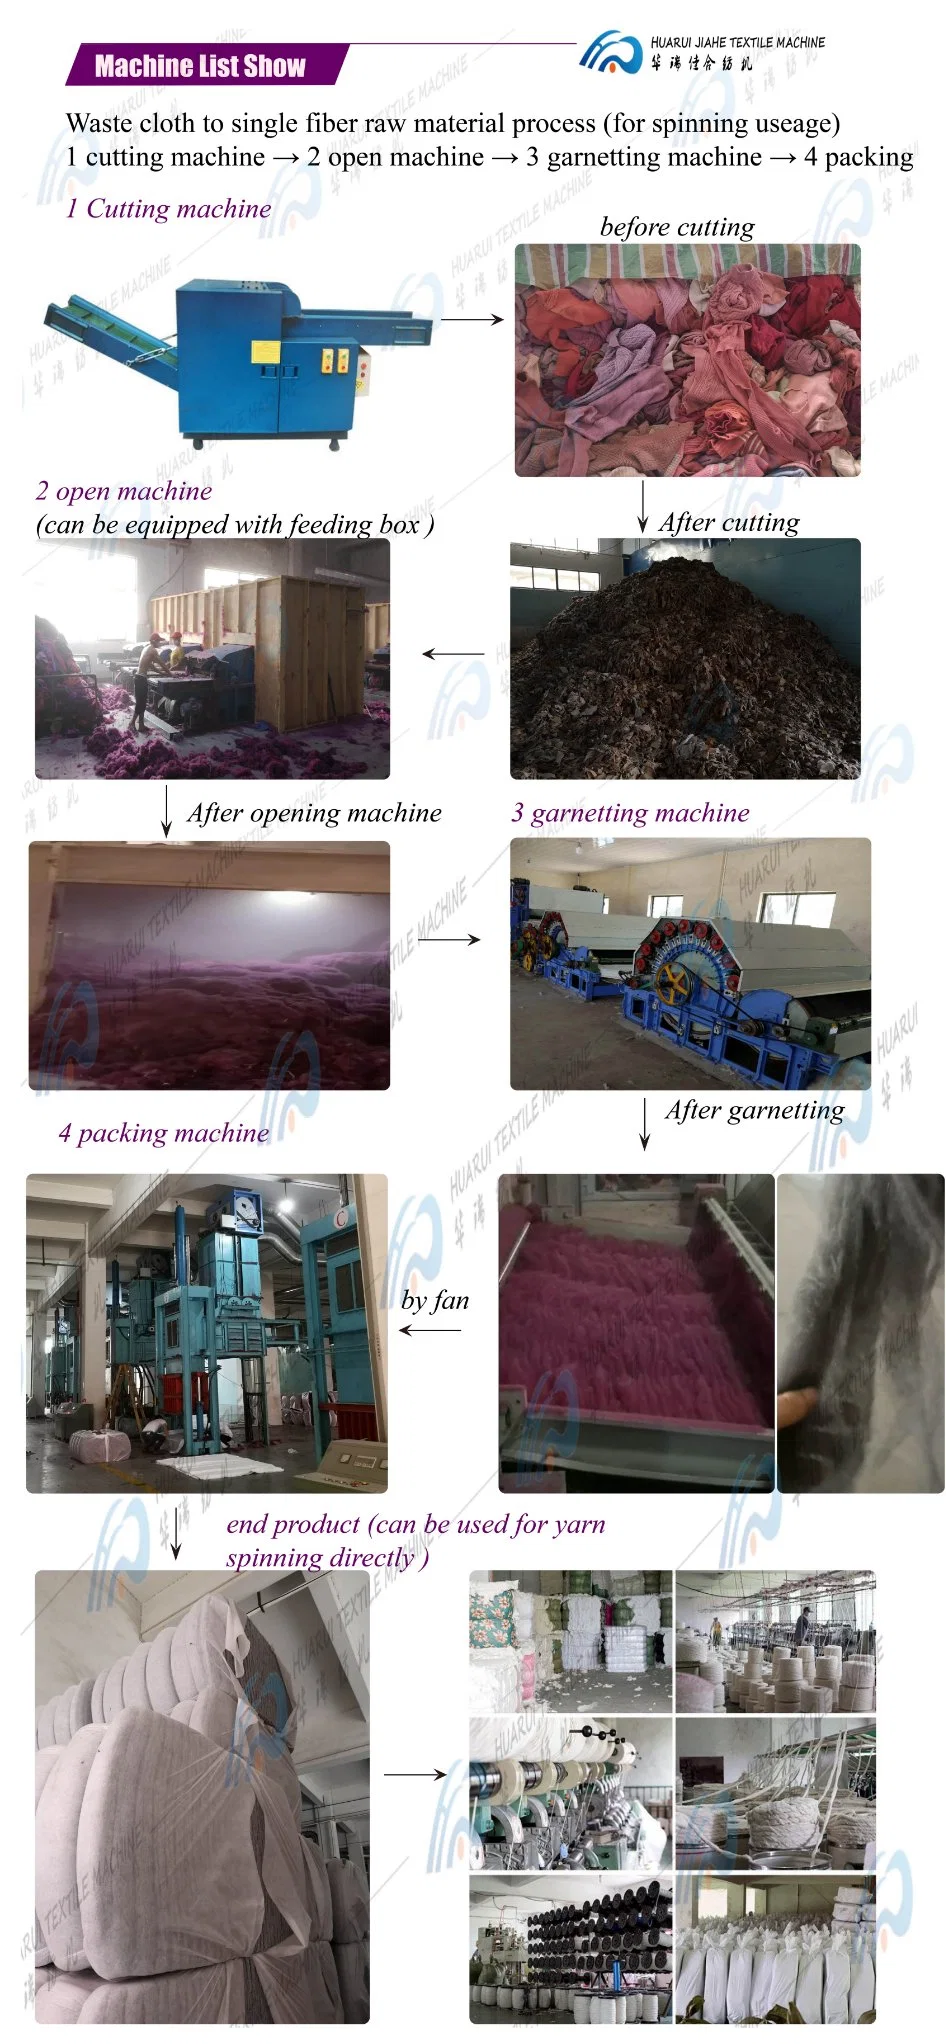 Nonwoven Fabric Making Opening Machine with Feeding Box Industrial Waste Old Clothes Cotton Rag Opener Machine Cotton Waste Cleaning Tearing Garnet Machine